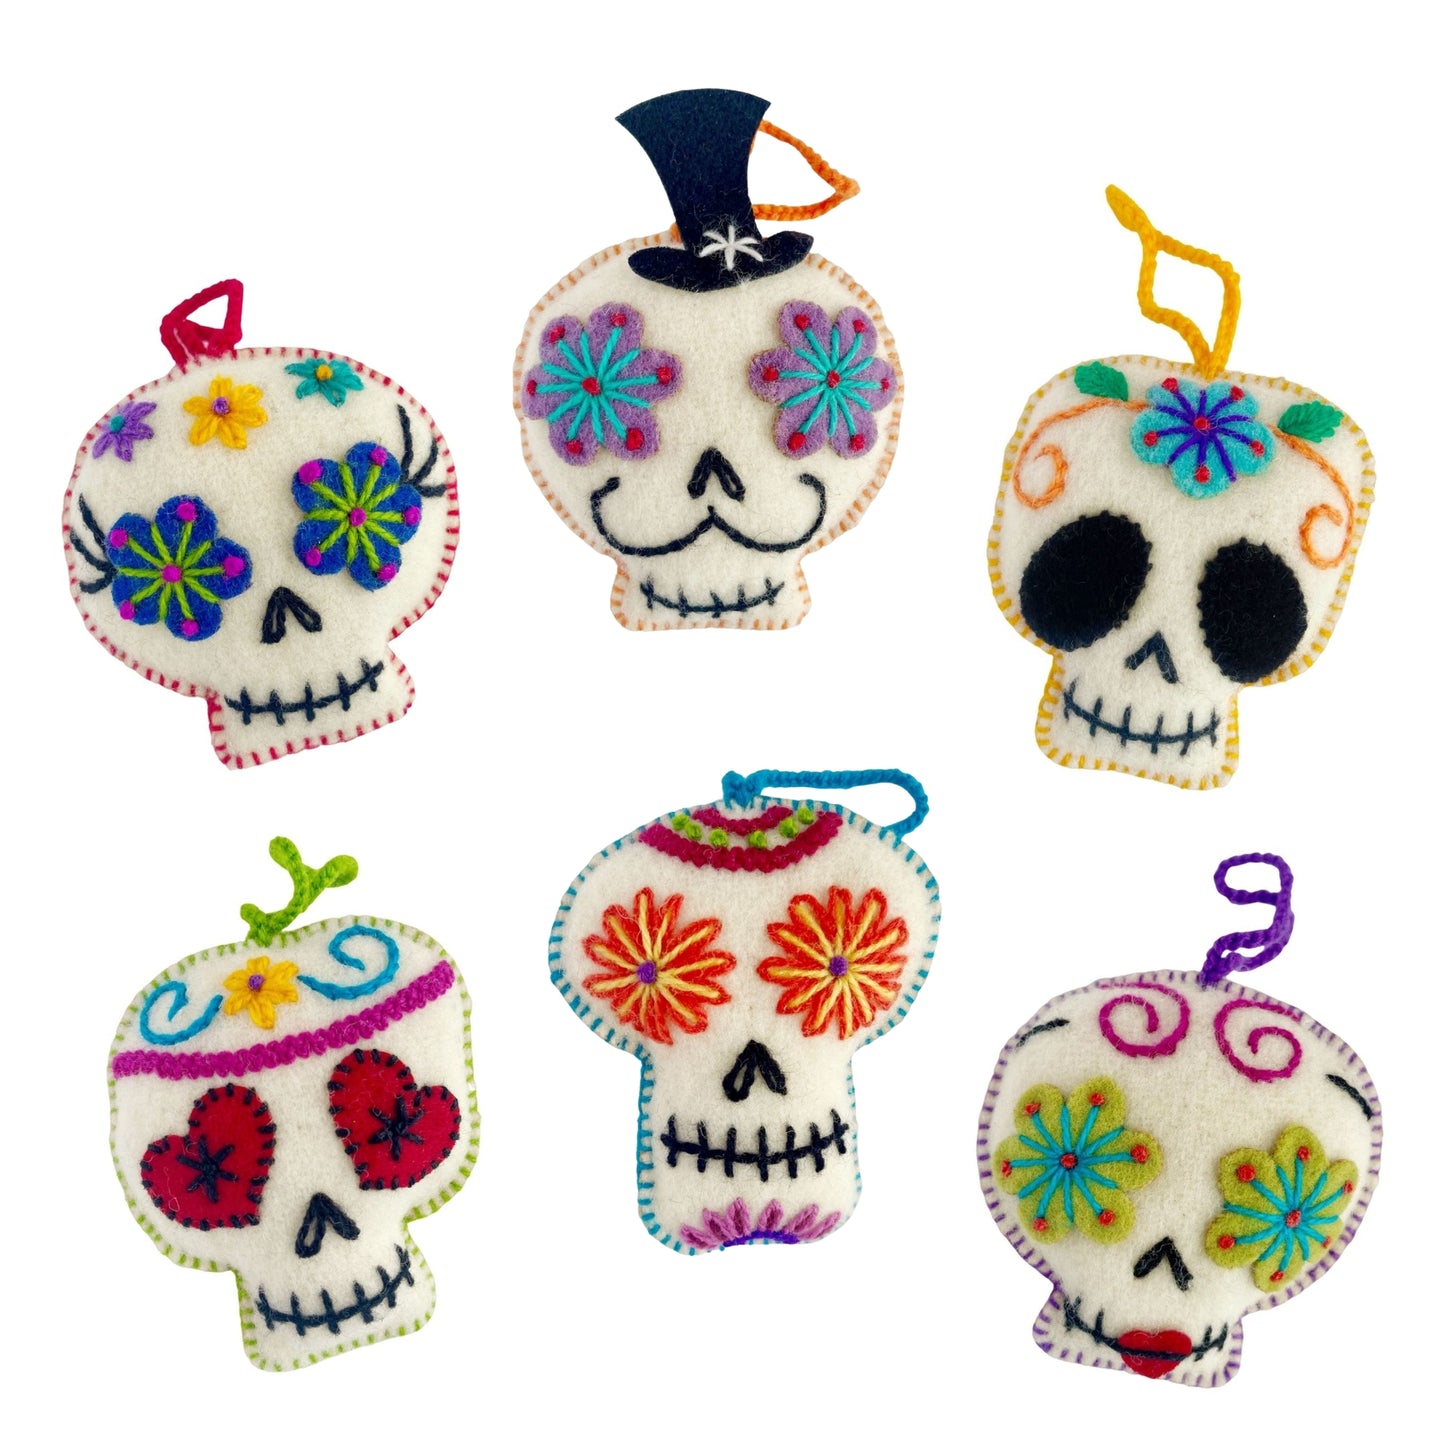 Embroidered Wool Skull Ornament